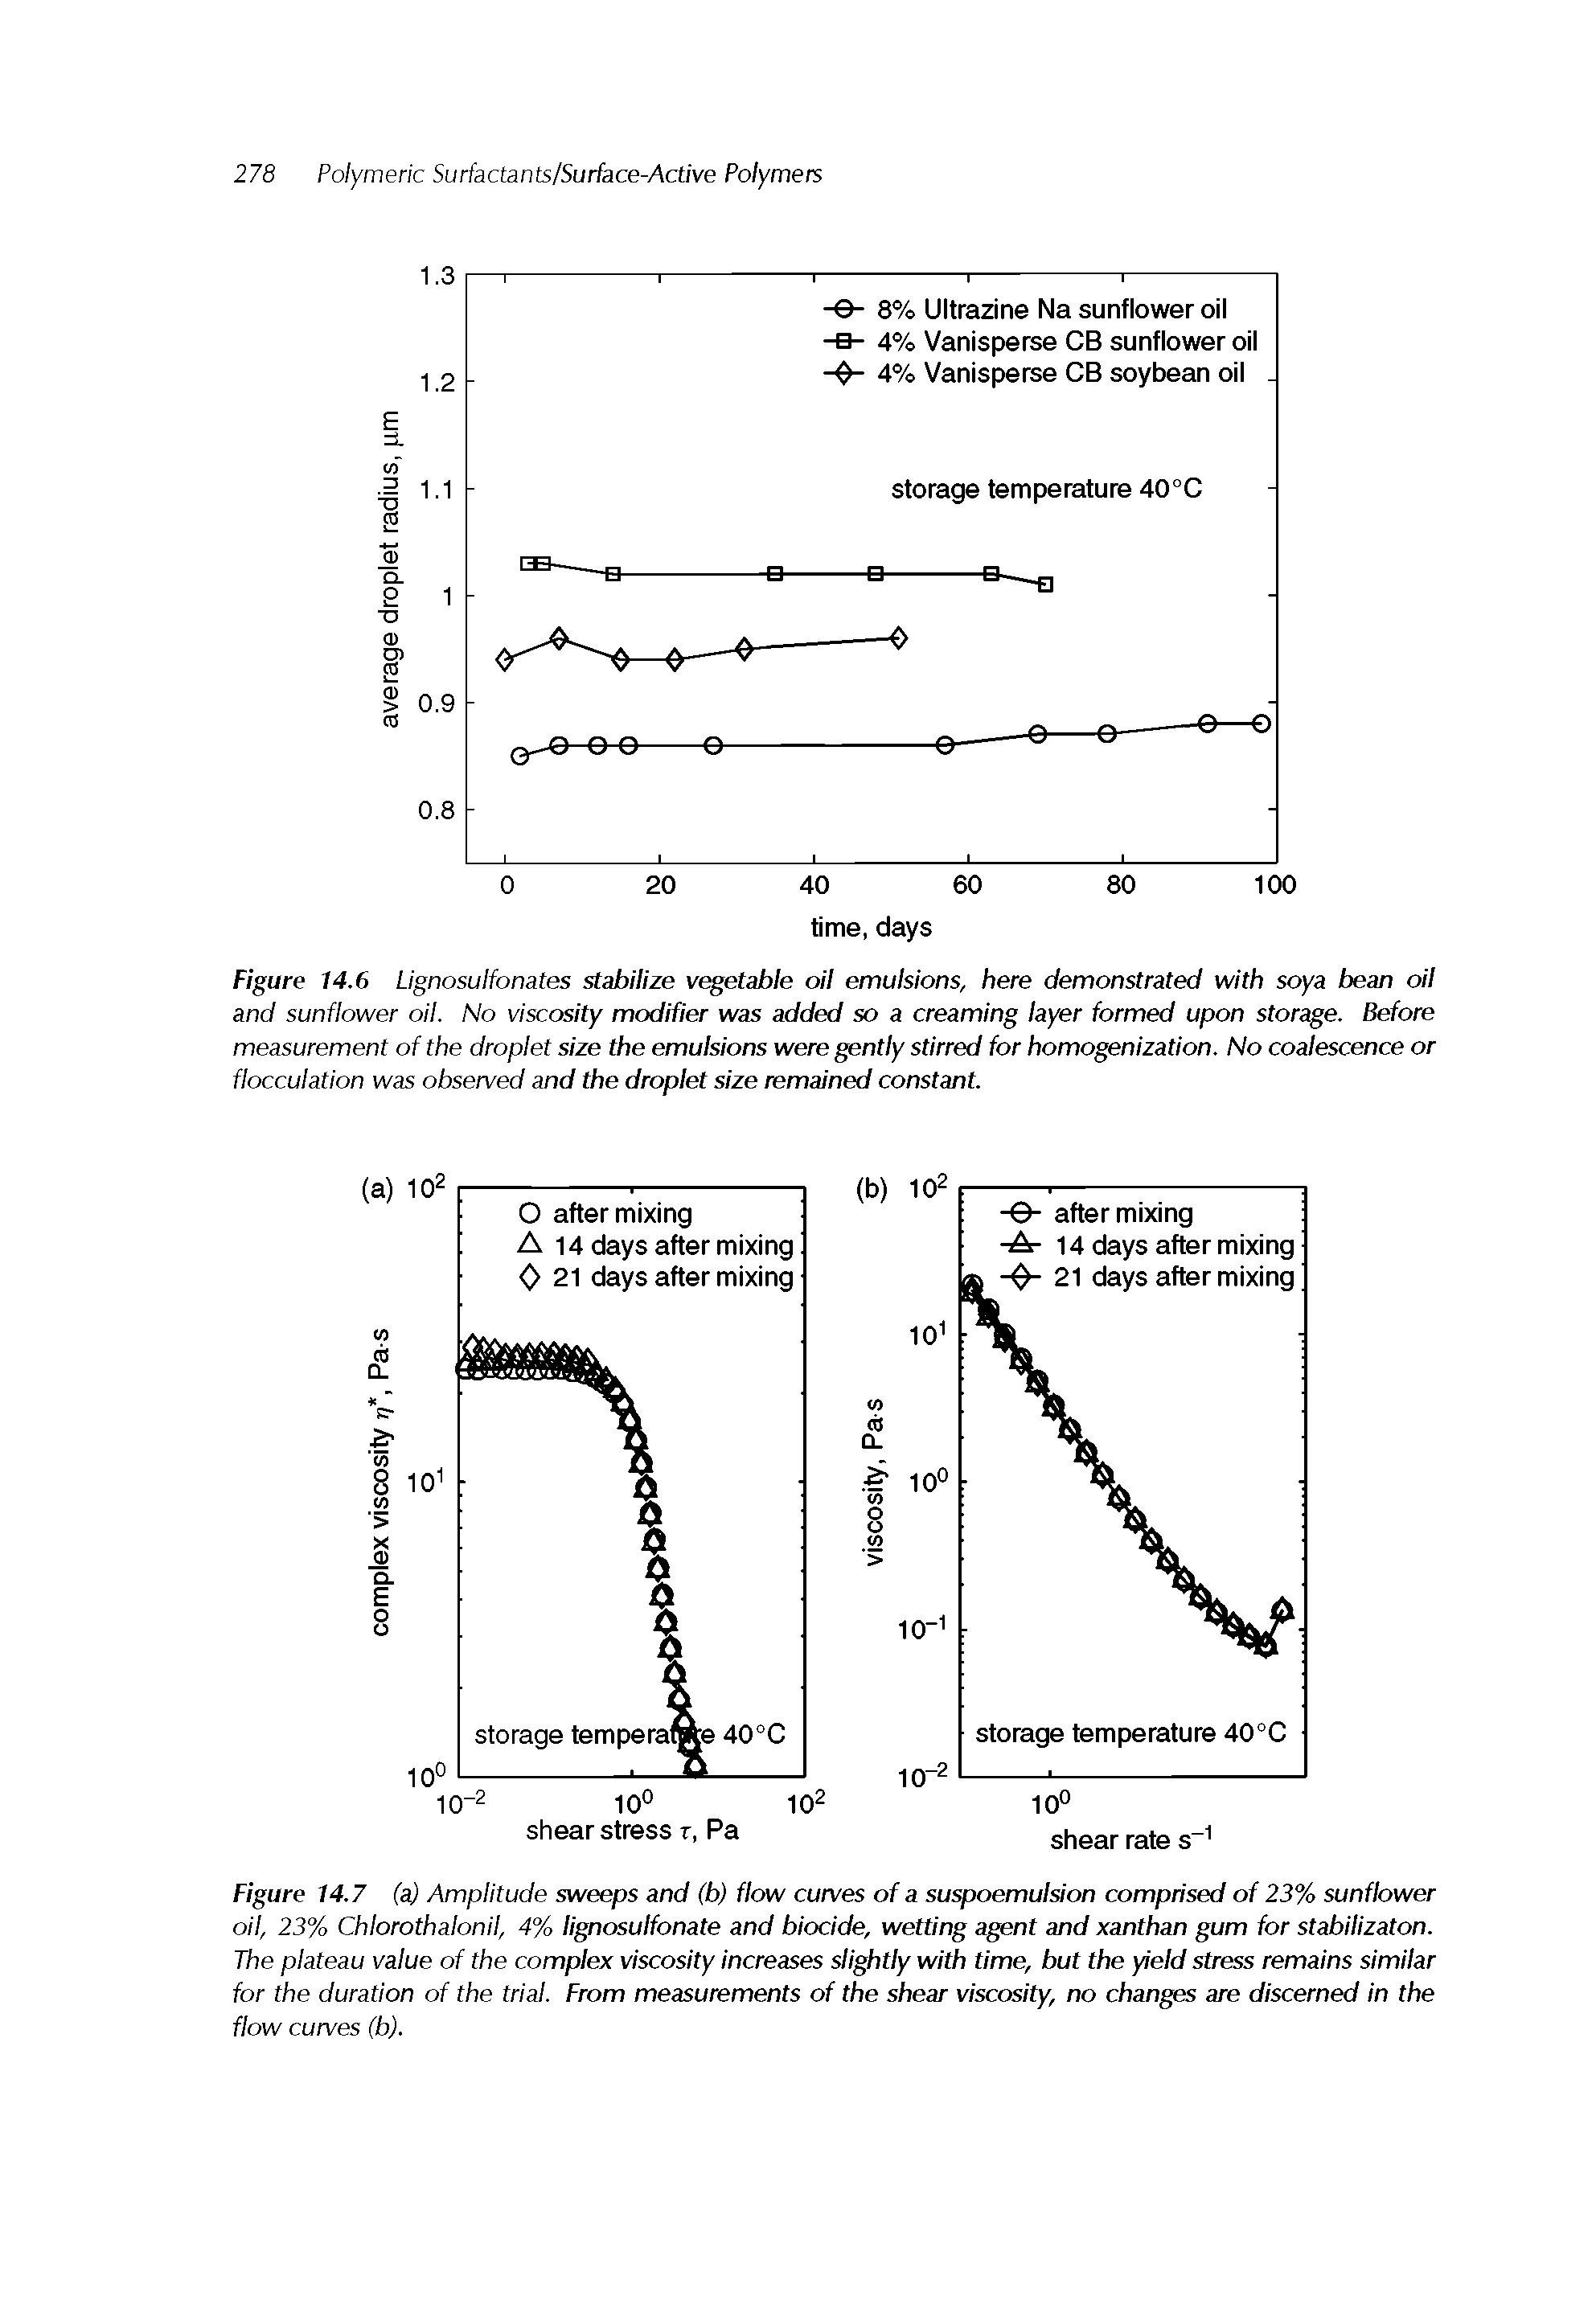 Figure 14.6 Lignosulfonates stabilize v etshie oil emulsions, here demonstrated with soya bean oil and sunflower oil. No viscosity modifier was added so a creaming layer formed upon storage. Before measurement of the droplet size the emulsions were gently stirred for homogenization. No coalescence or flocculation was observed and the droplet size remained constant.